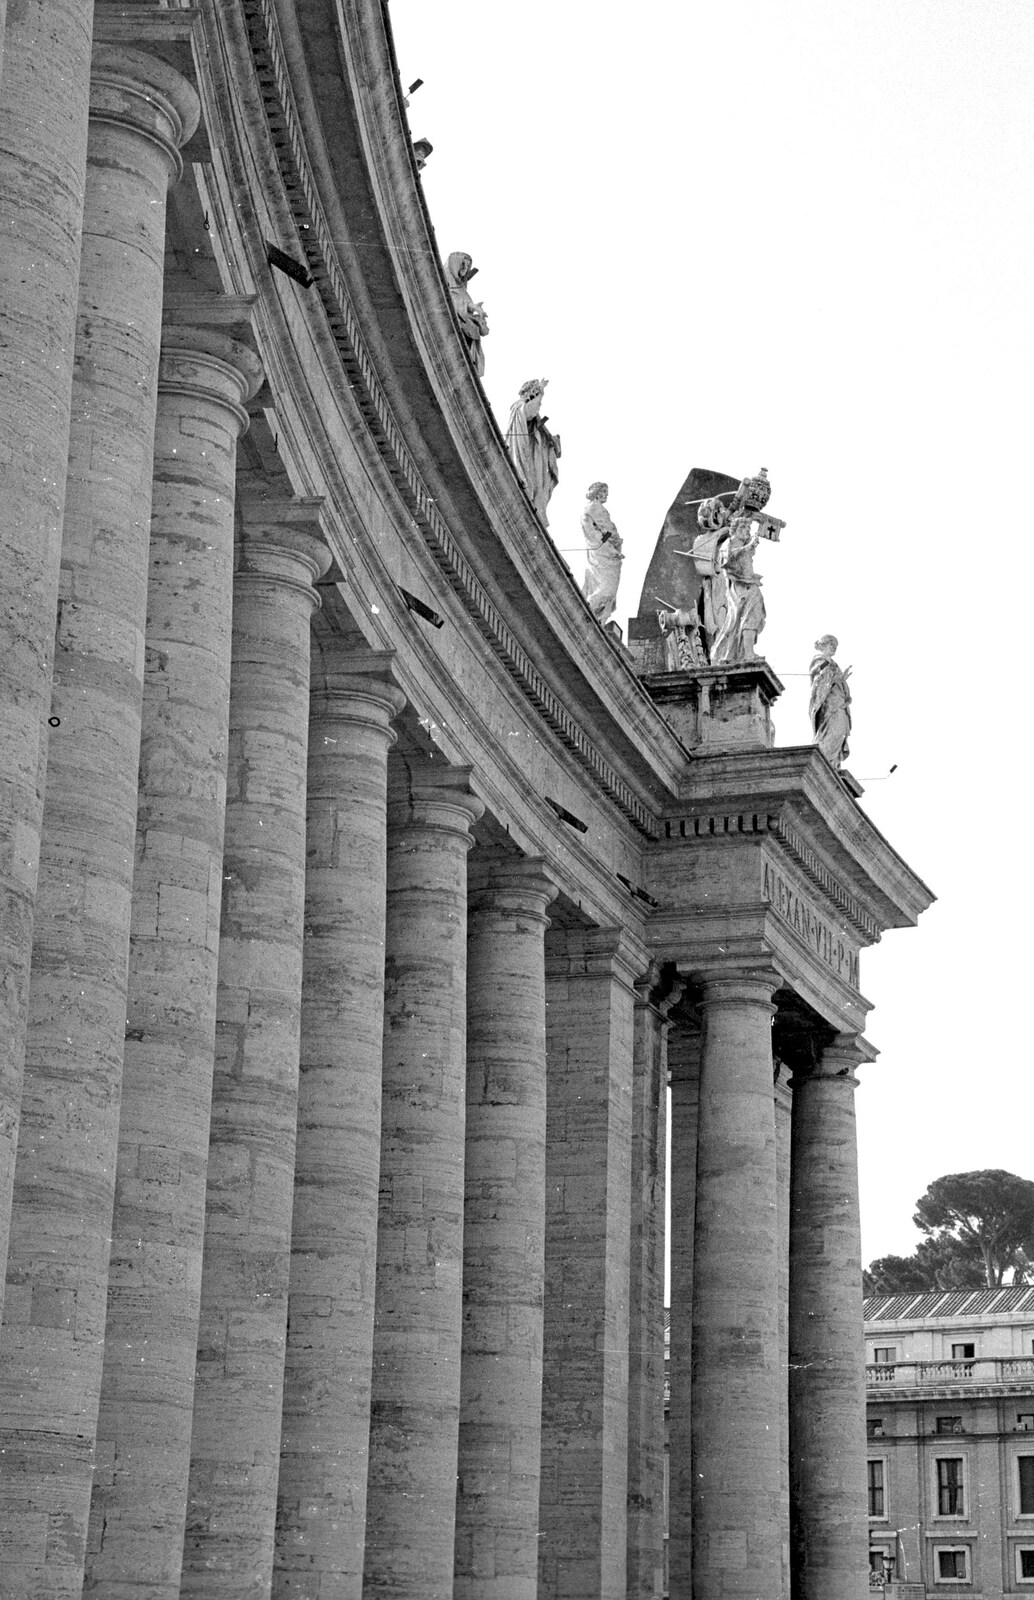 Columns around St. Peter's Square from A Working Trip to Rome, Italy - 10th September 1999